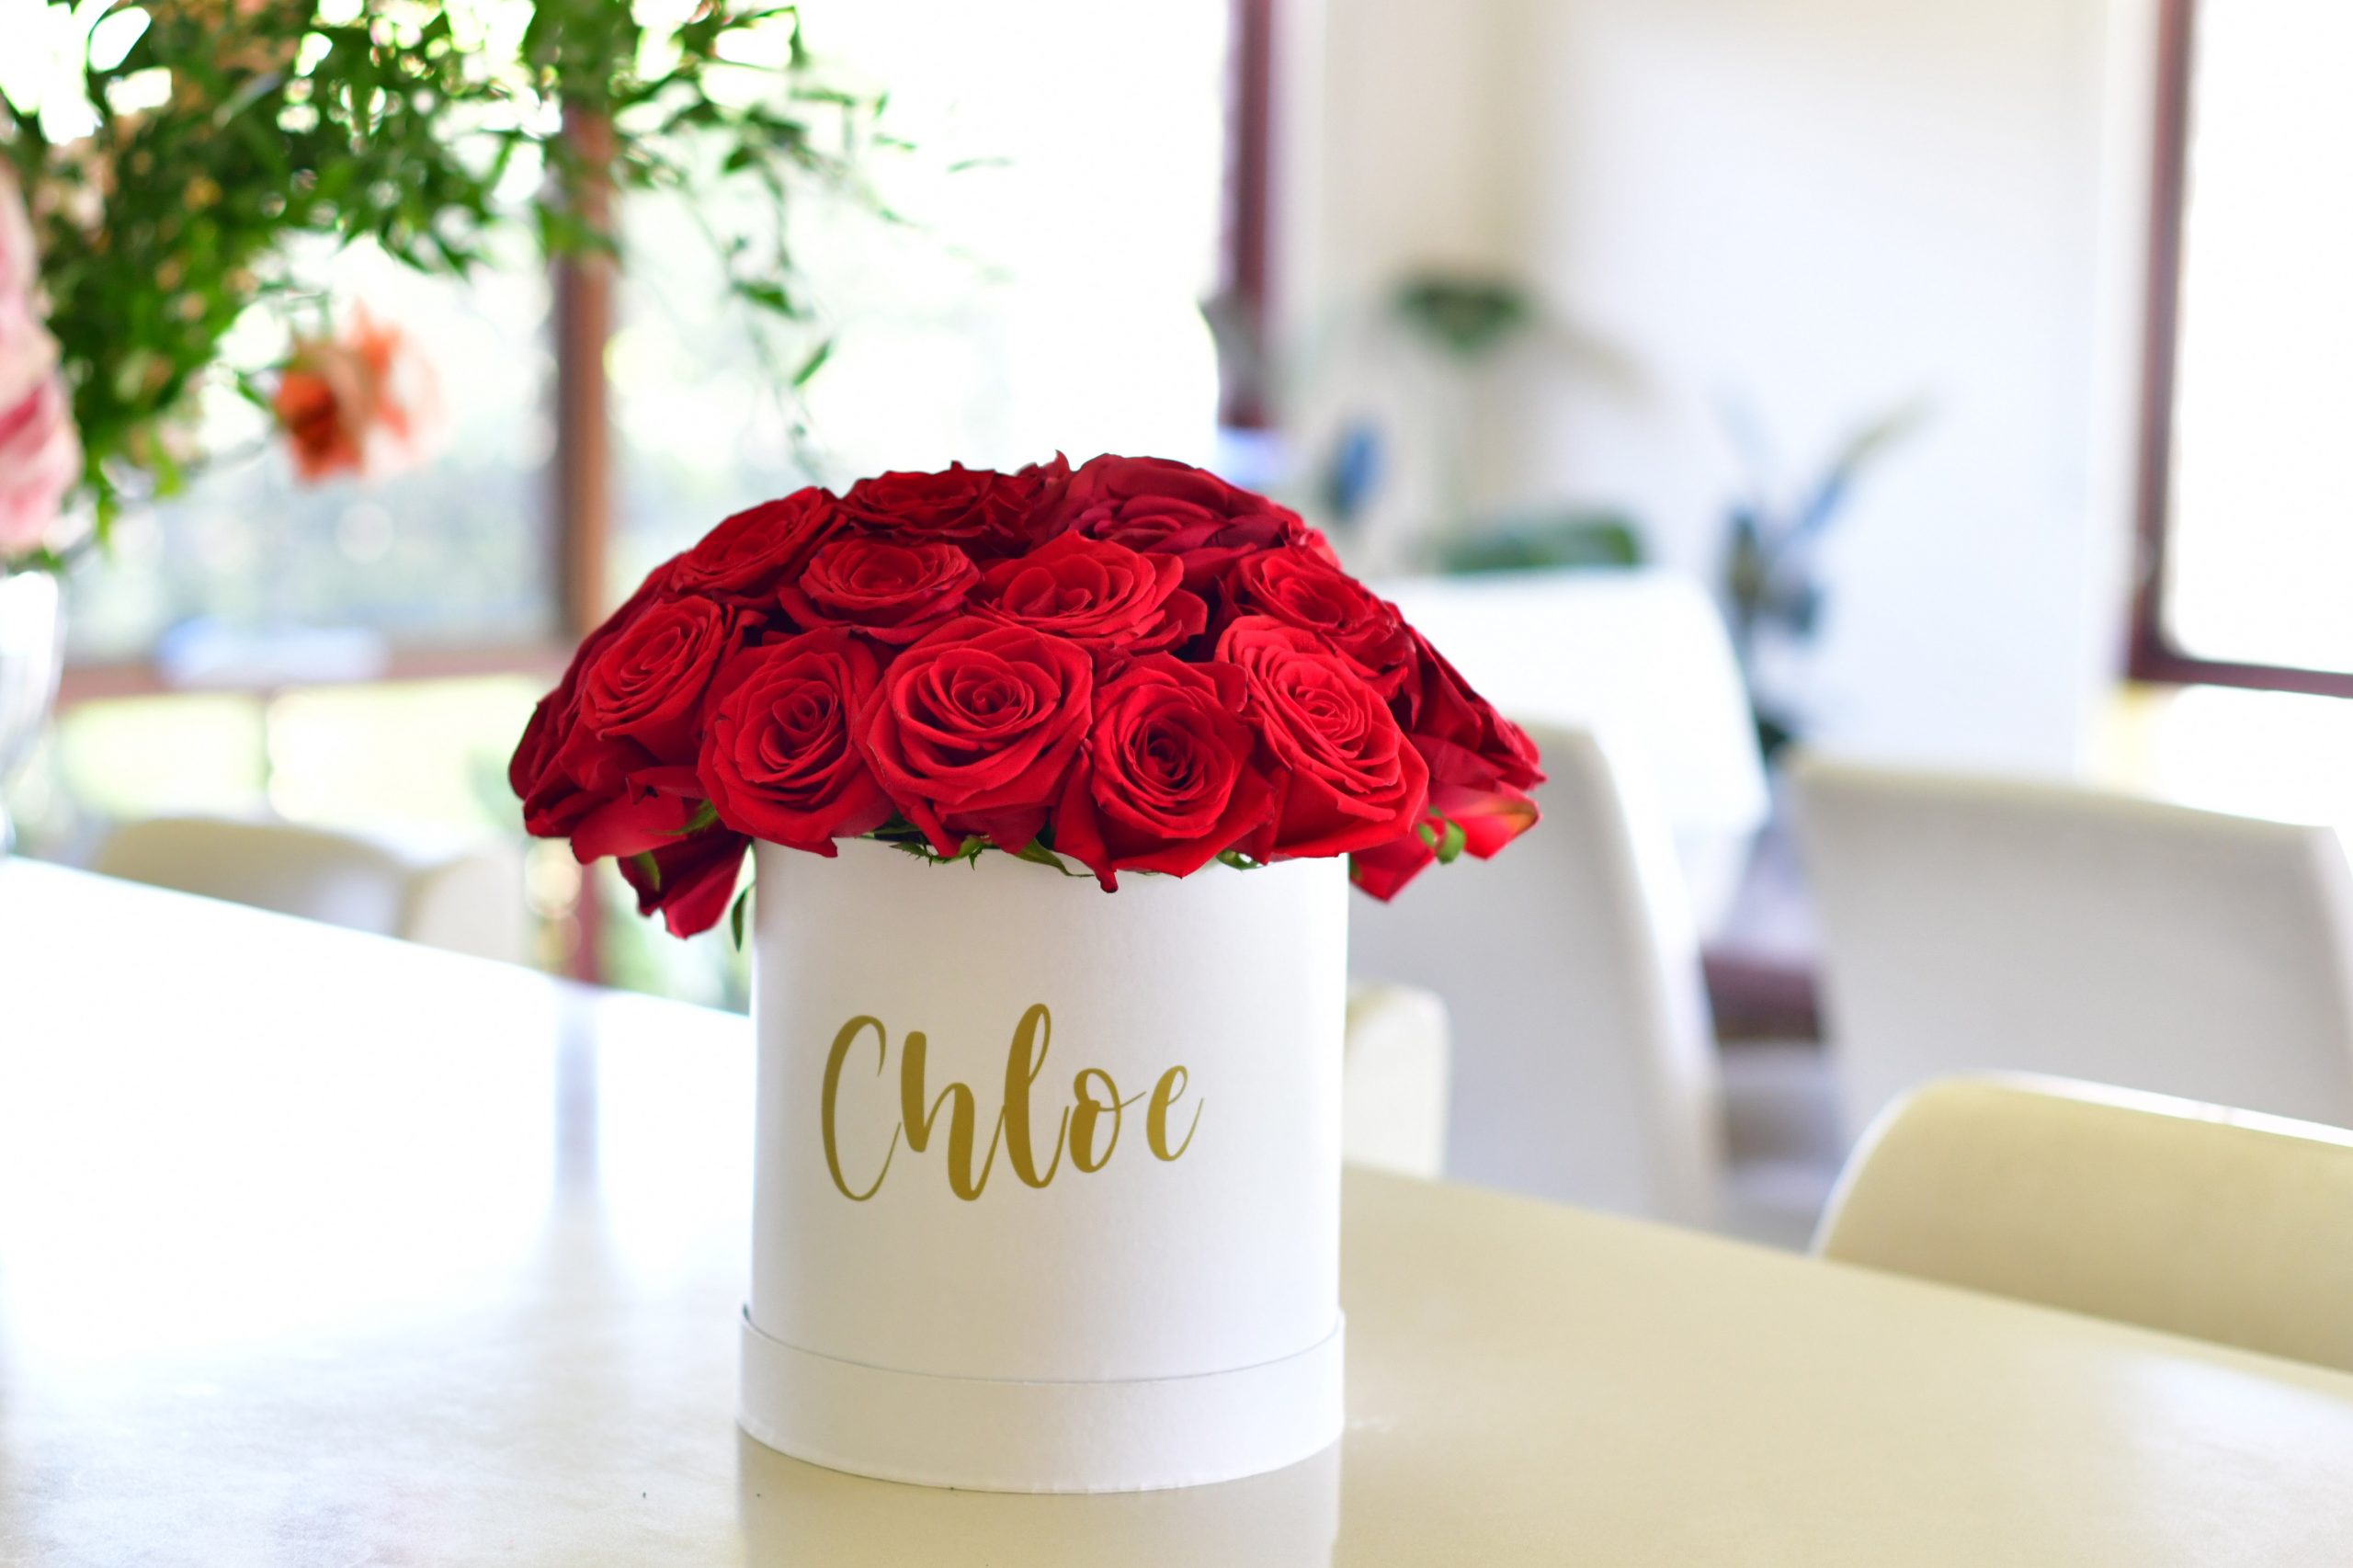 Send your love on Valentine's Day with beautiful roses in a classic rose box